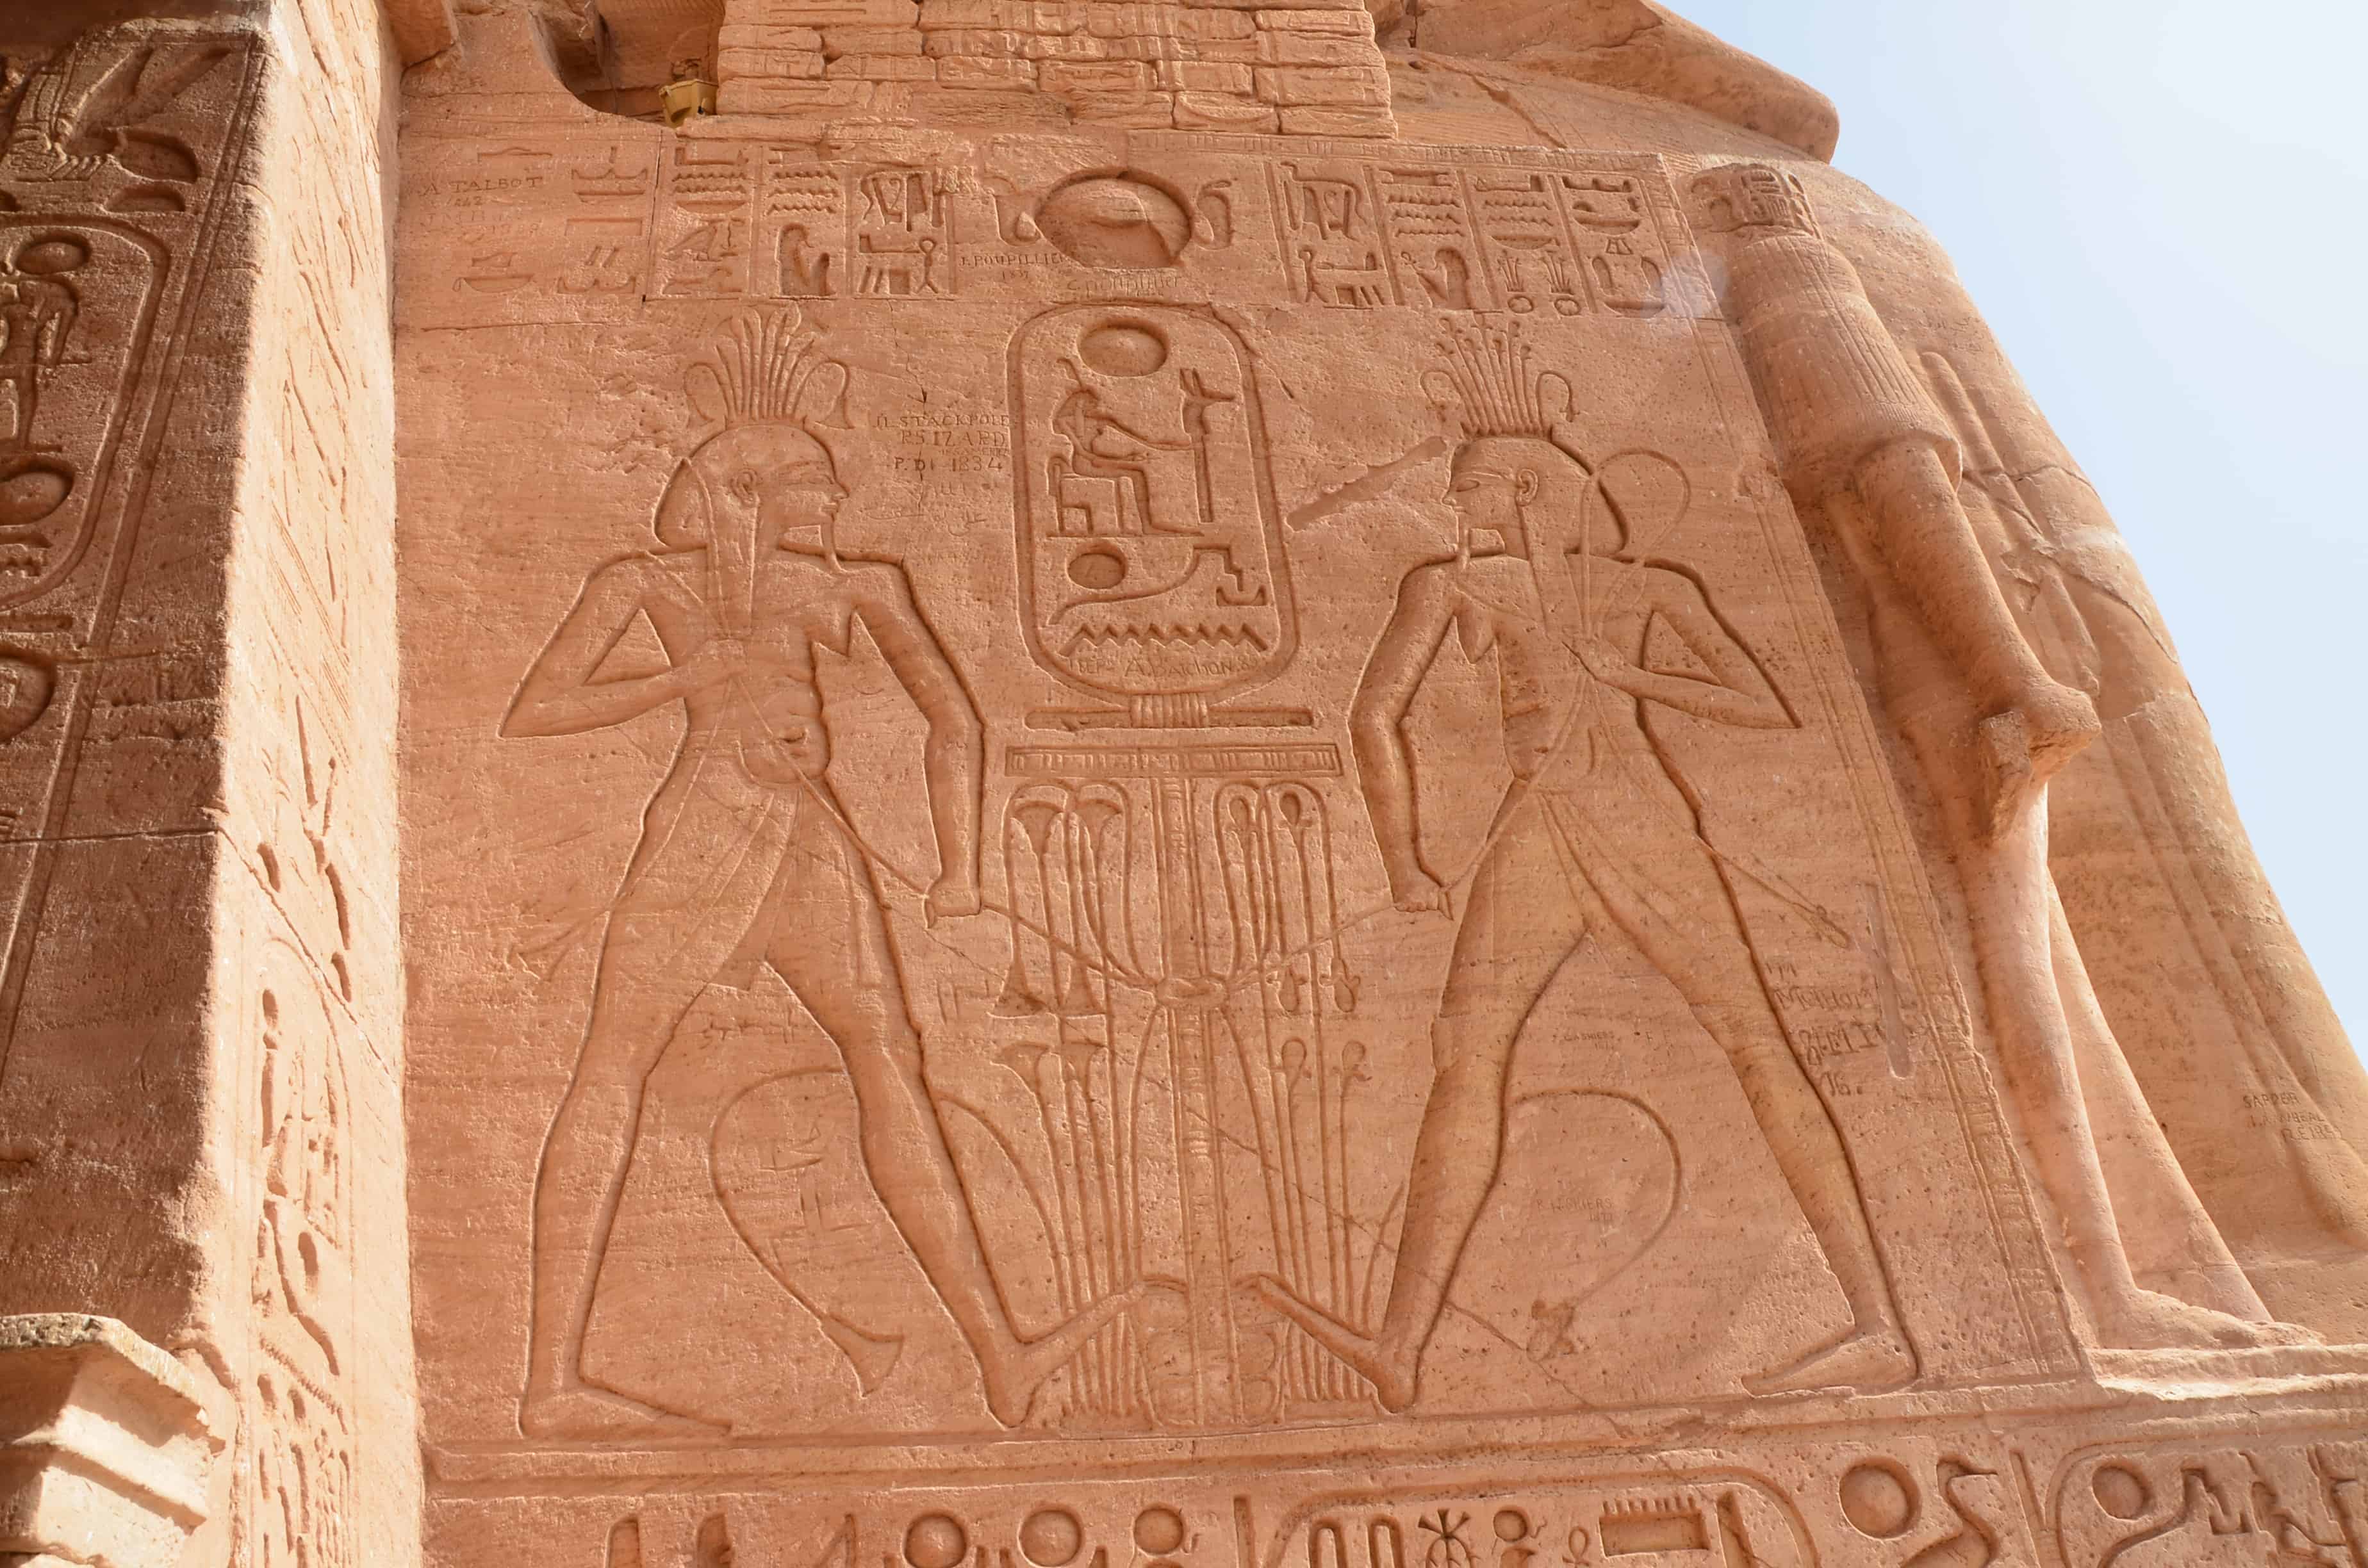 Hieroglyphic relief outside the entrance to the Temple of Ramses II at Abu Simbel, Egypt